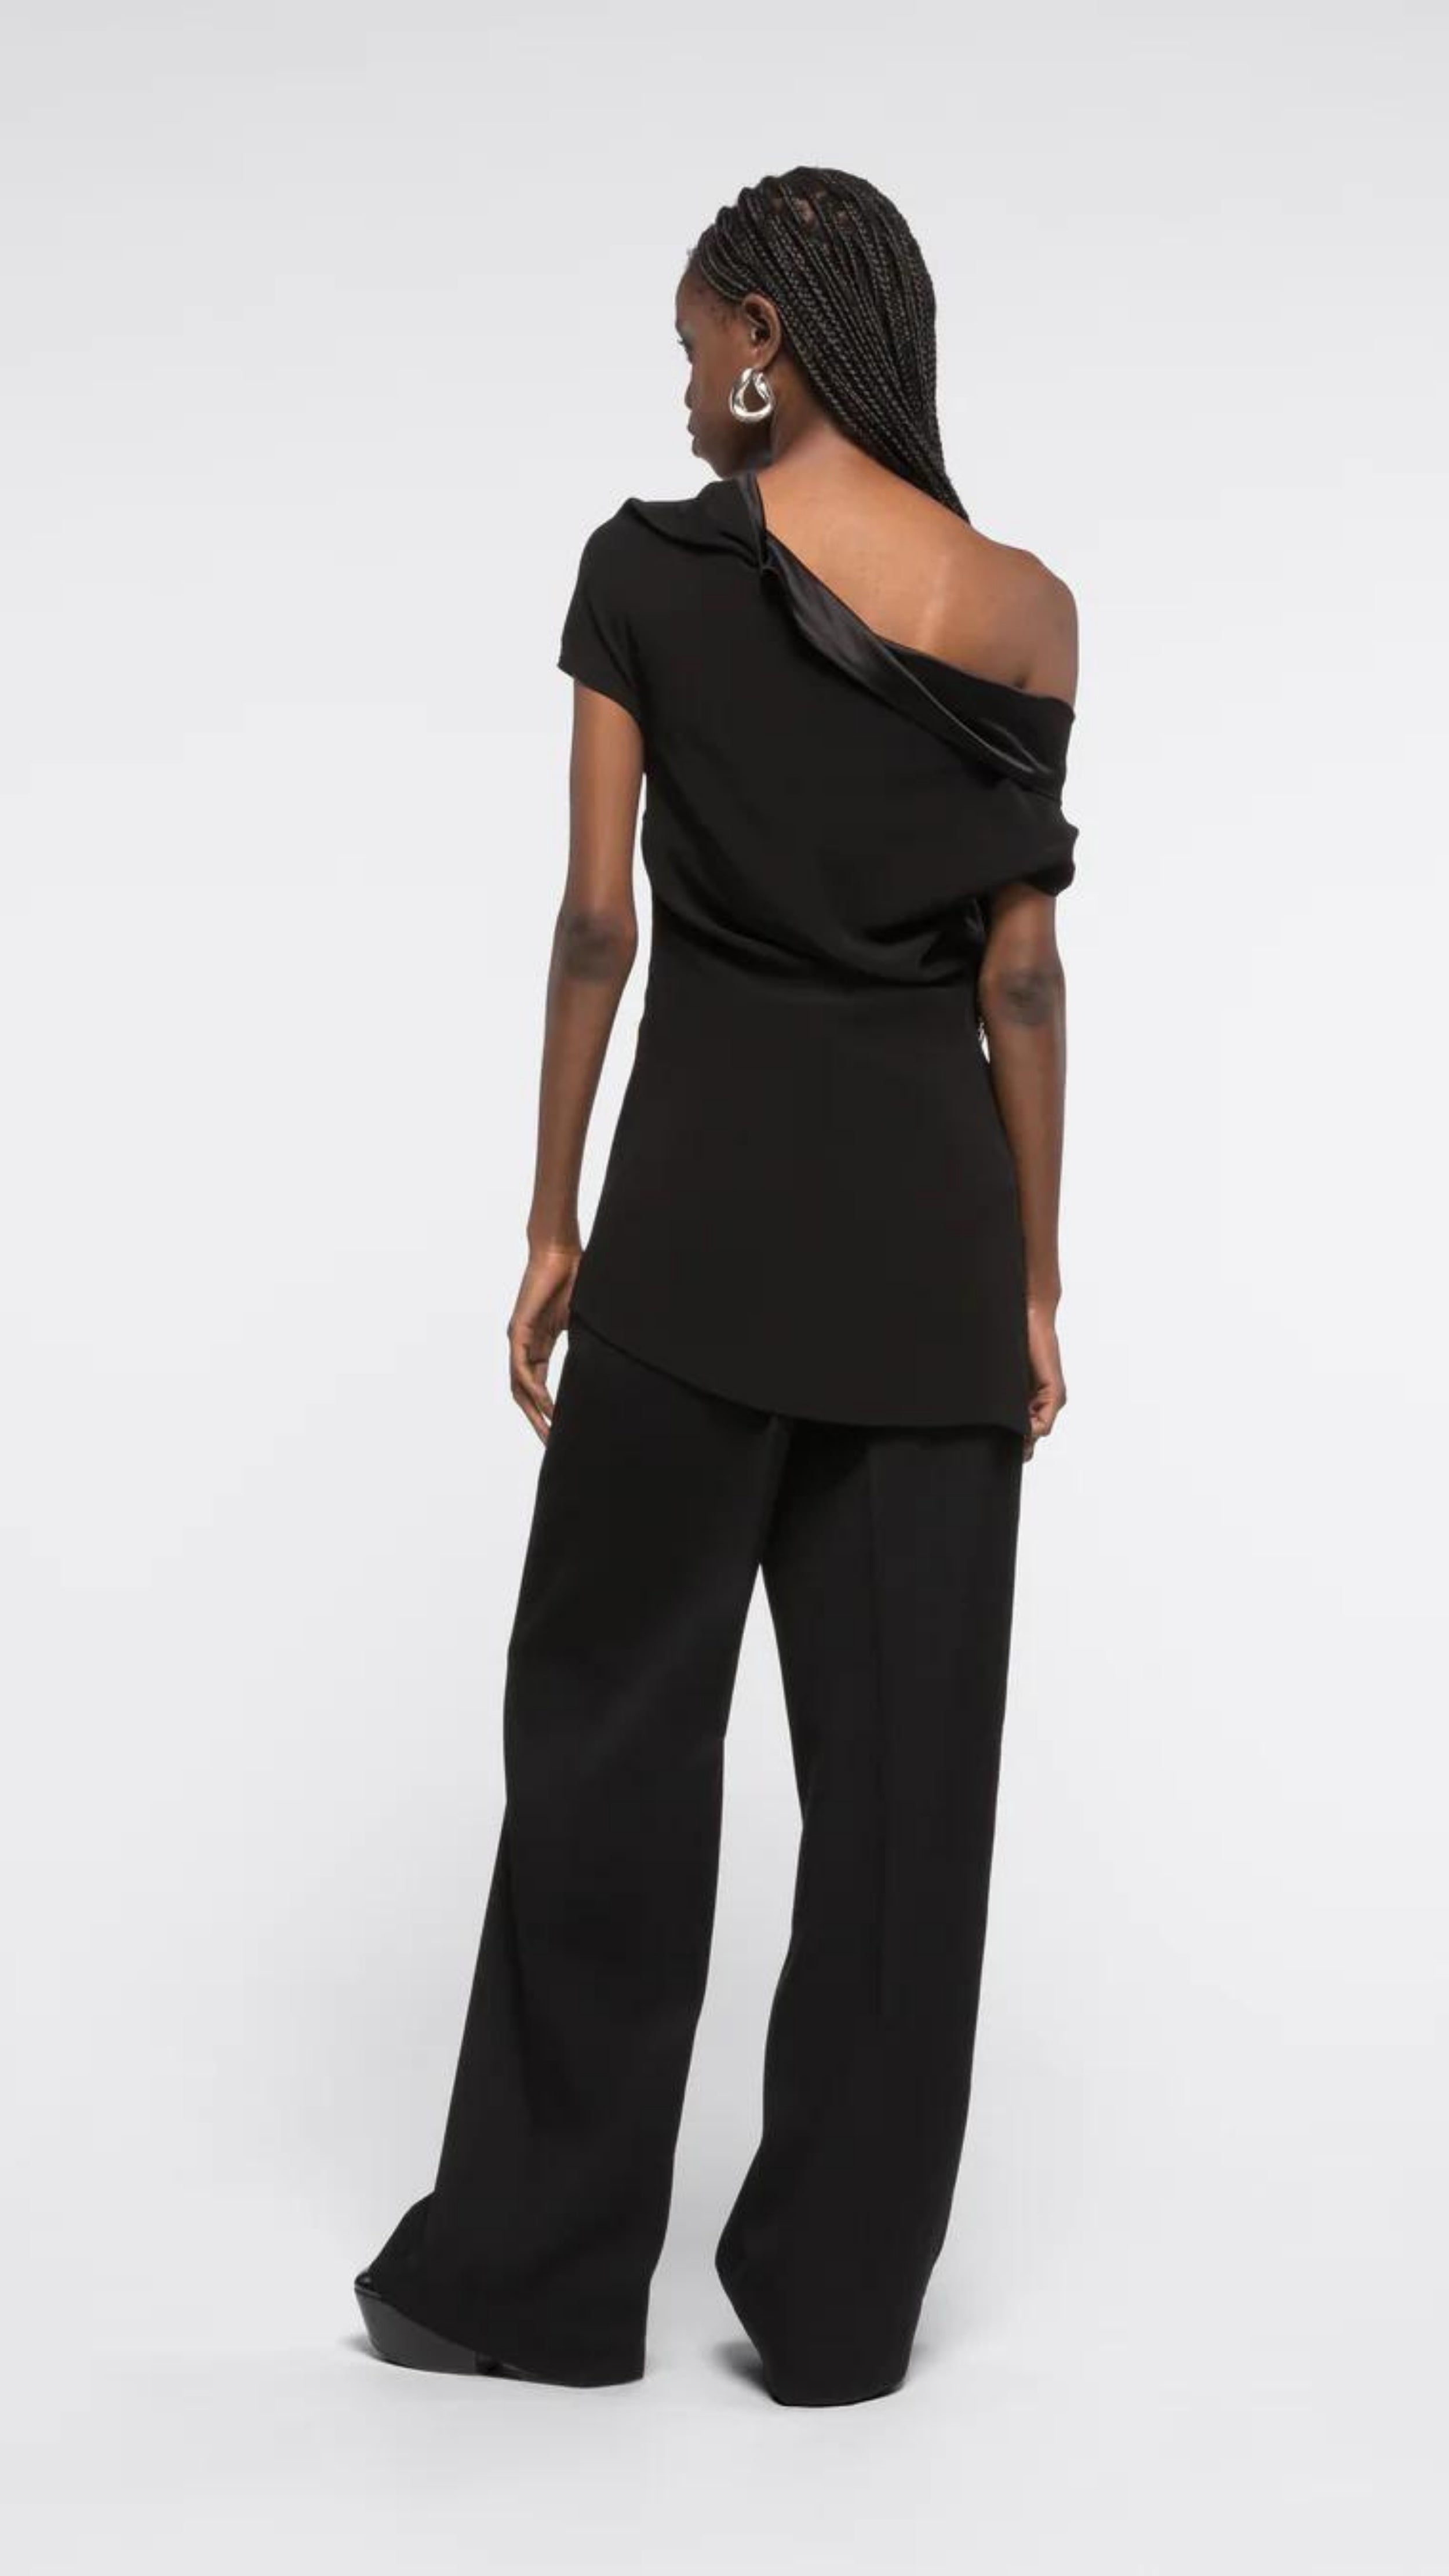 AZ Factory Colville Molly Molloy Lucinda Chambers, Draped Satin Top. Draped satin top with matte and shine satine fabric. Asymmetrical across the top to provide an off the shoulder style on one side. Shown on model from the back.